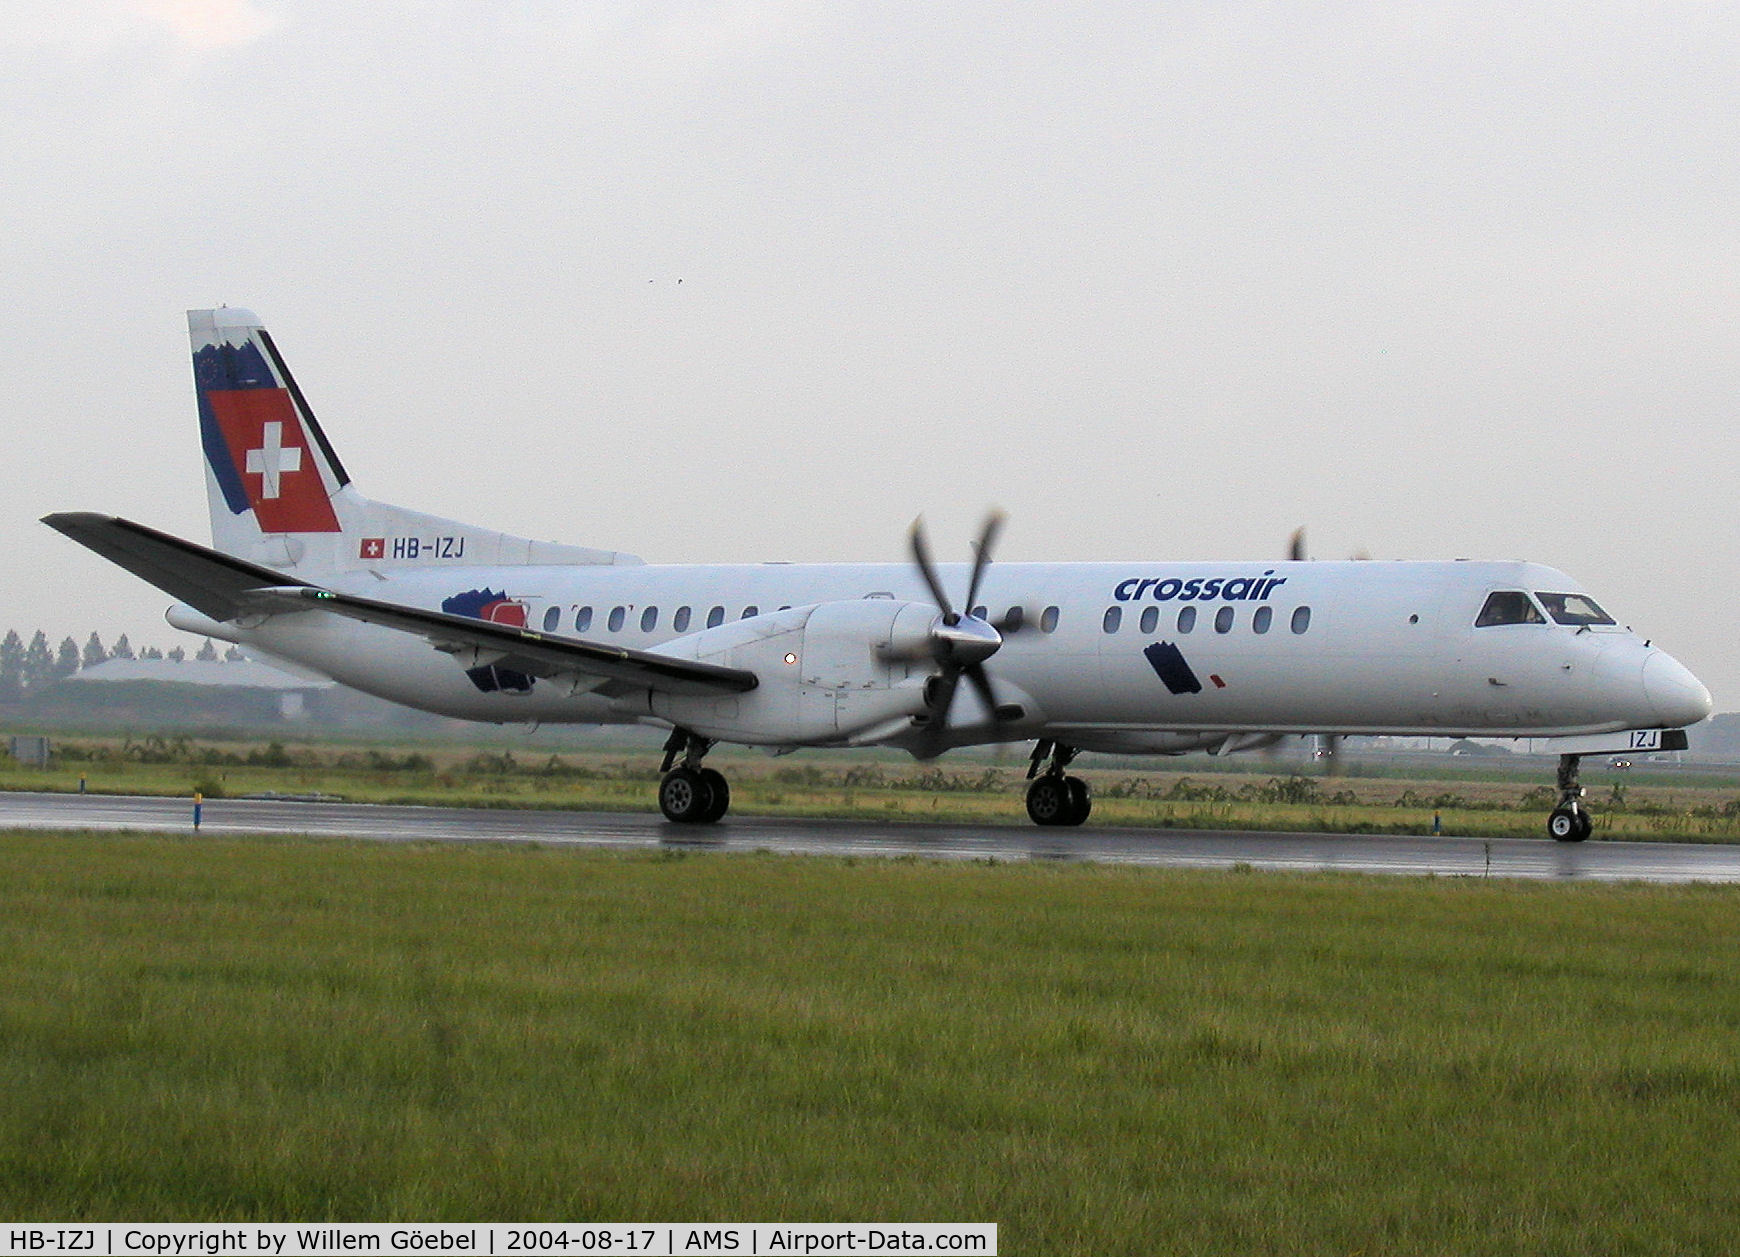 HB-IZJ, 1995 Saab 2000 C/N 2000-015, Taxi to the gate of Schiphol Airport